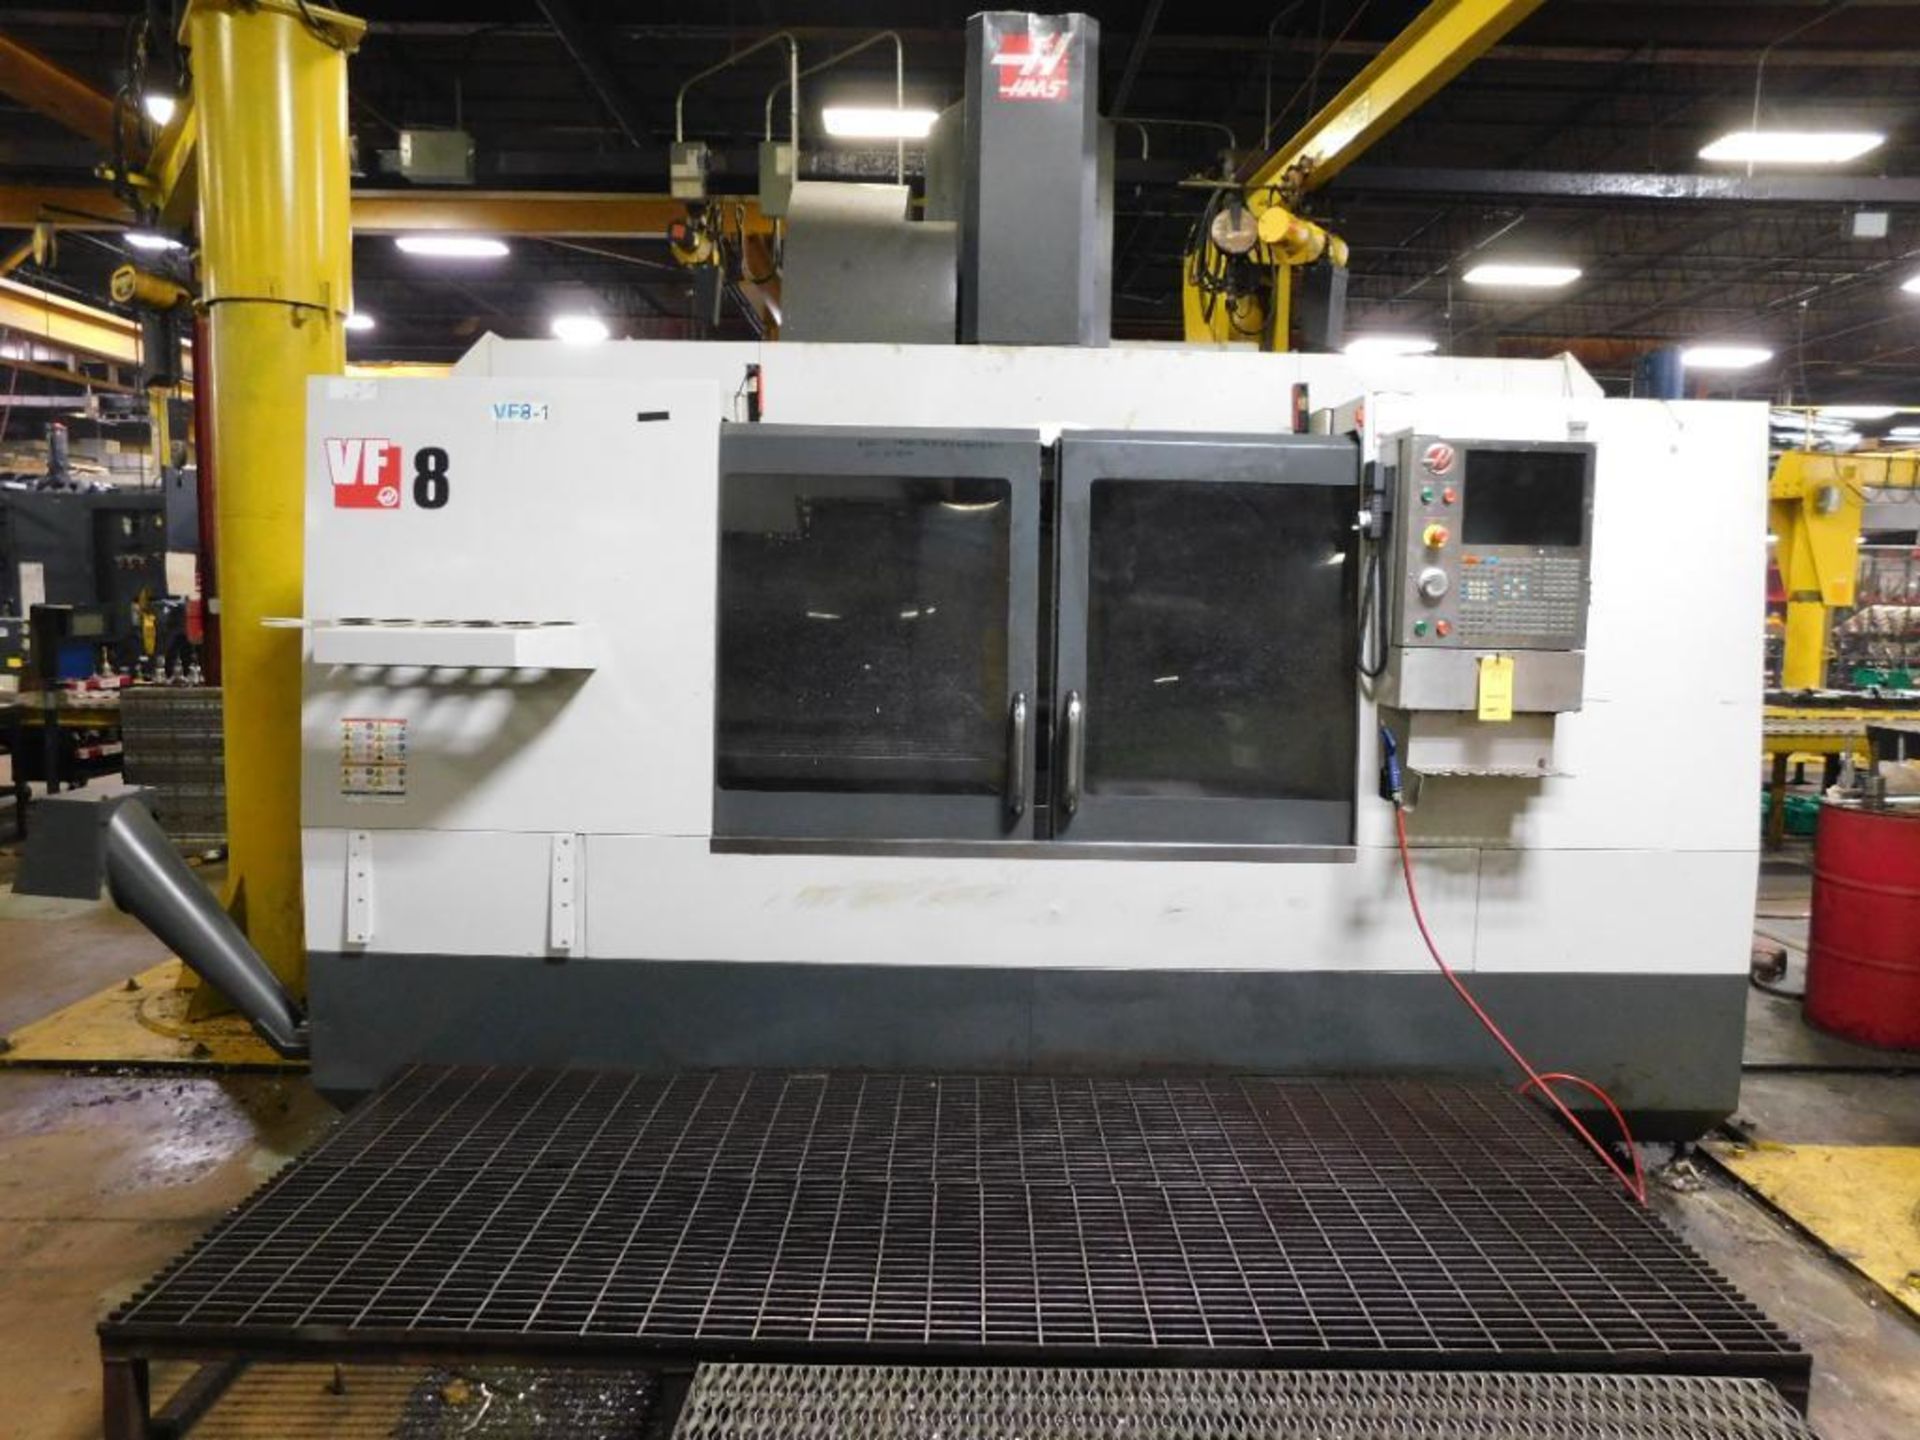 2014 Haas Model VF-8/50 3-Axis CNC Vertical Machining Center, S/N: 1111710 (Unit # 524), 30 HP CAT 5 - Image 5 of 11